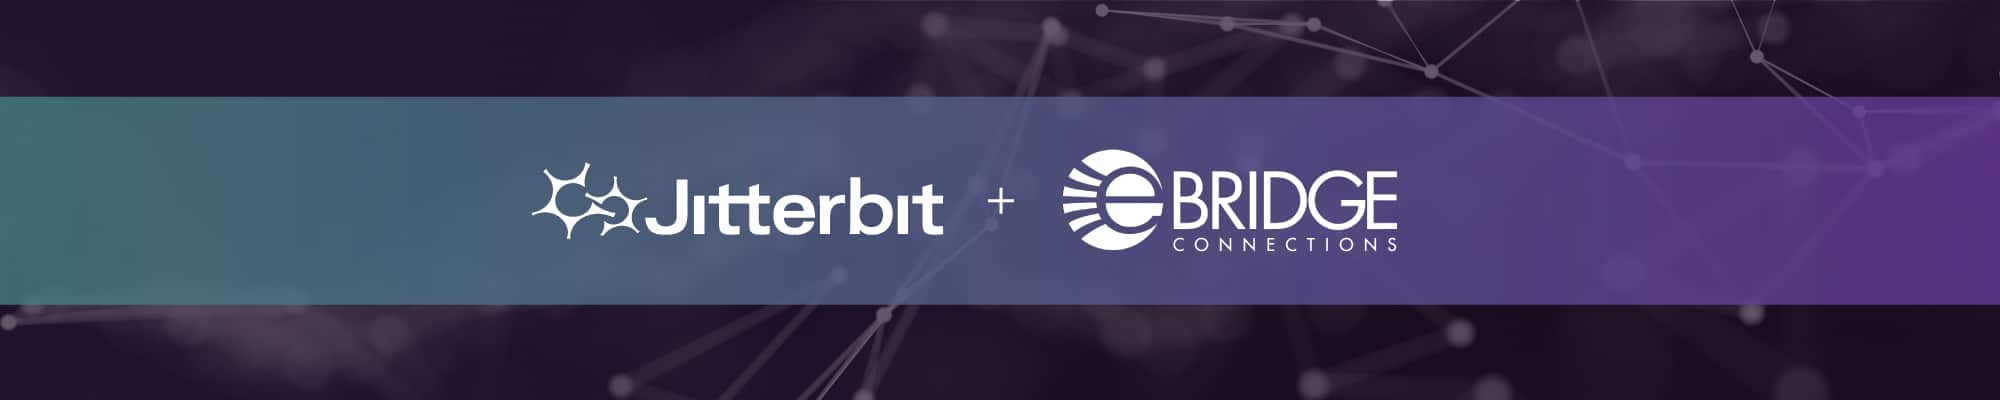 Jitterbit Acquires eBridge Connections, Leader in B2B and E-Commerce Integrations